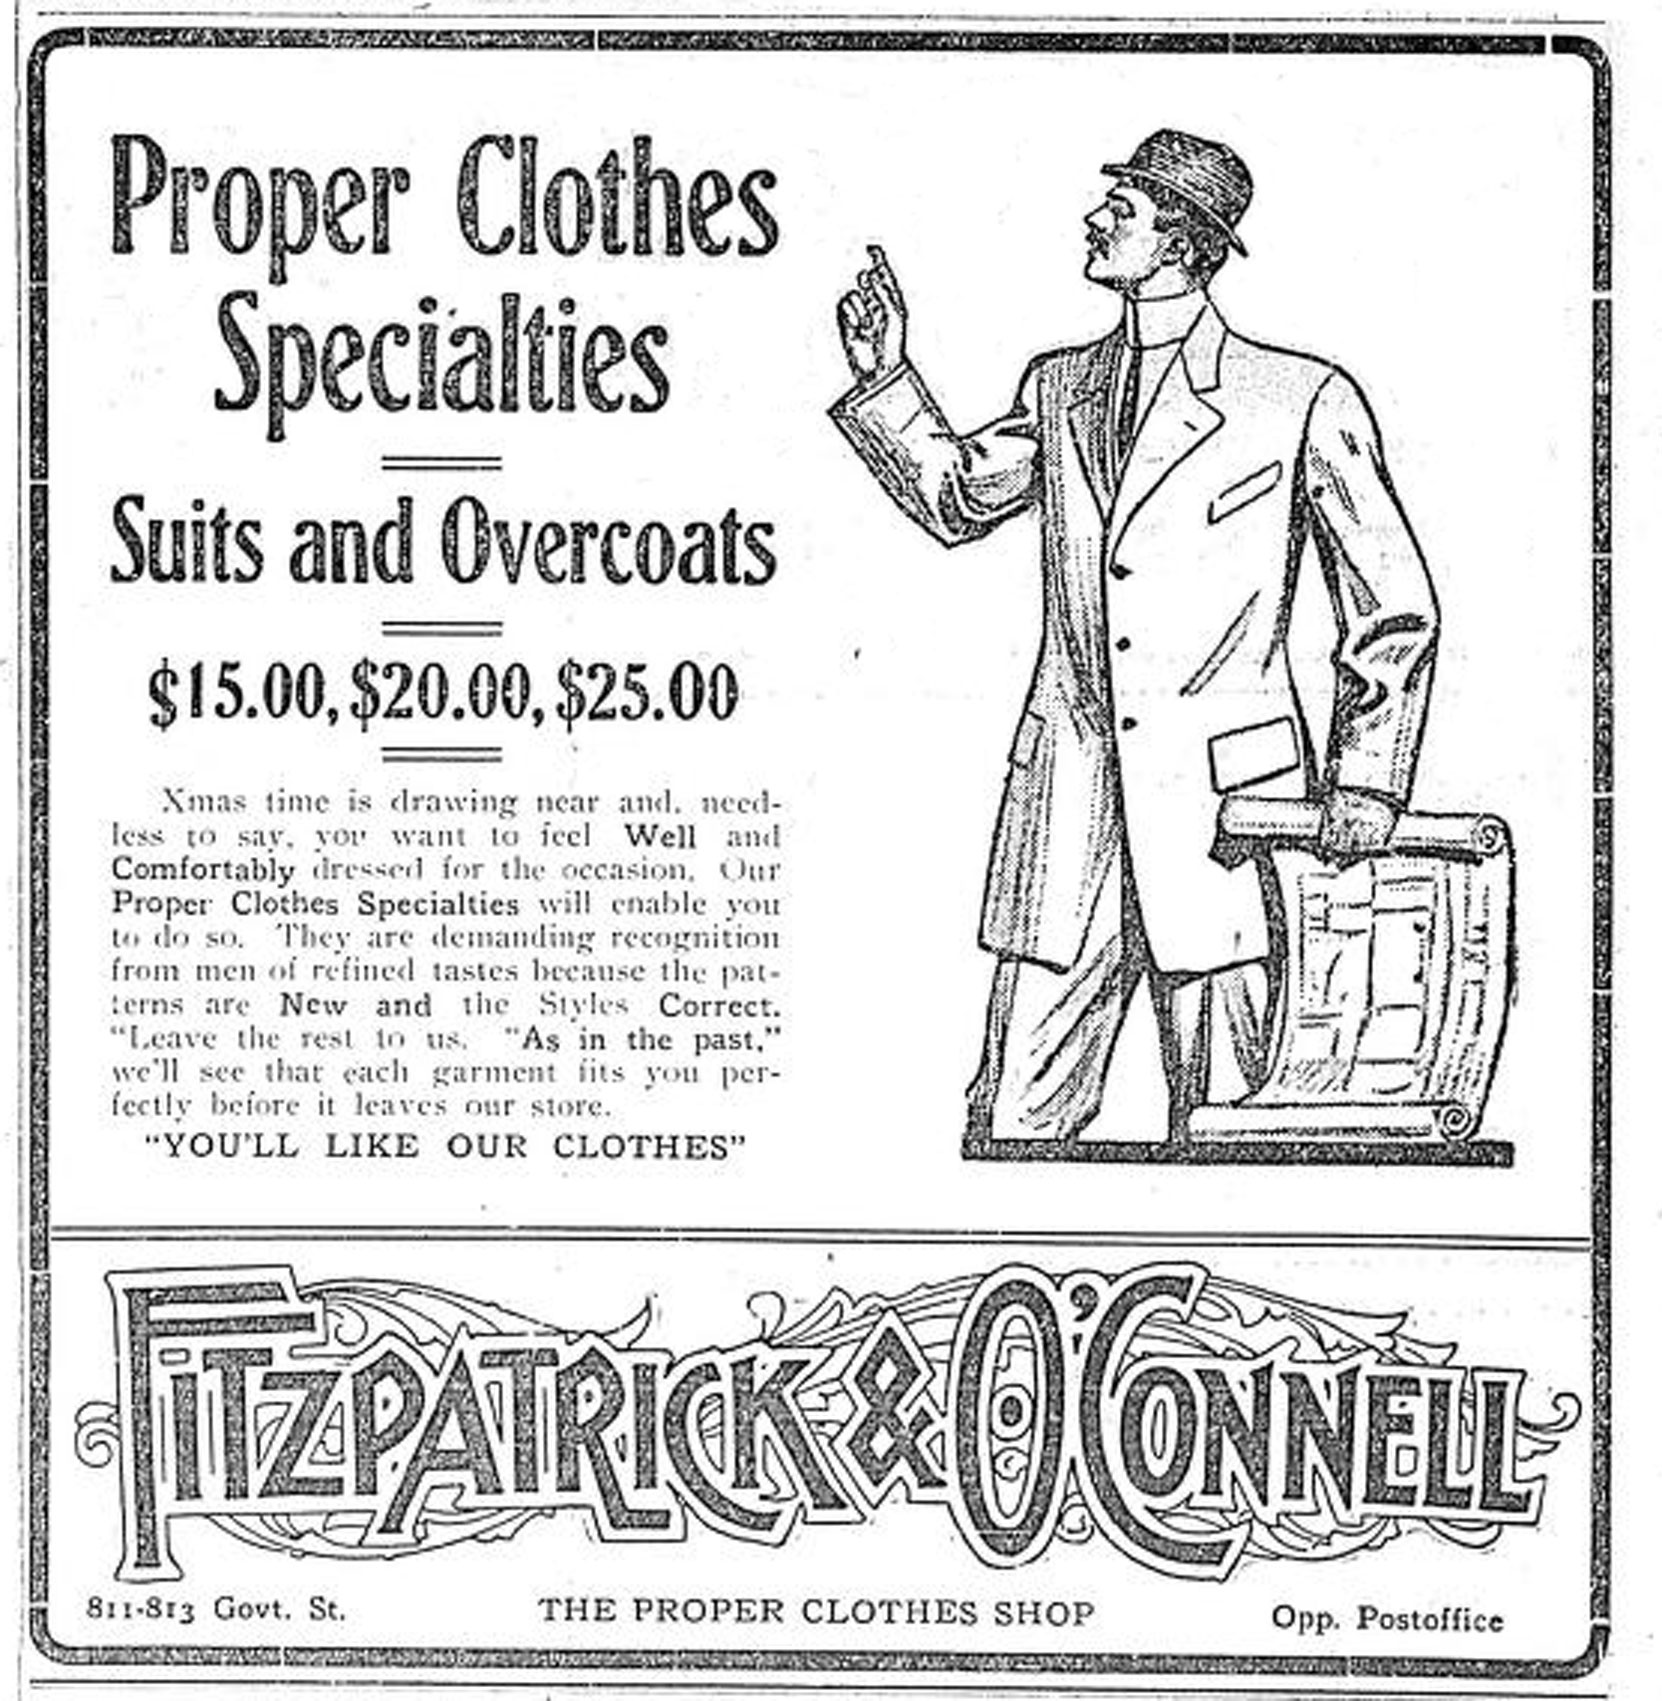 1909 advertisement for Fitzpatrick & O'Connell, The Proper Clothes Shop, 811-813 Government Street. The building in which this business was located is still standing. (Victoria Online Sightseeing Tours collection)